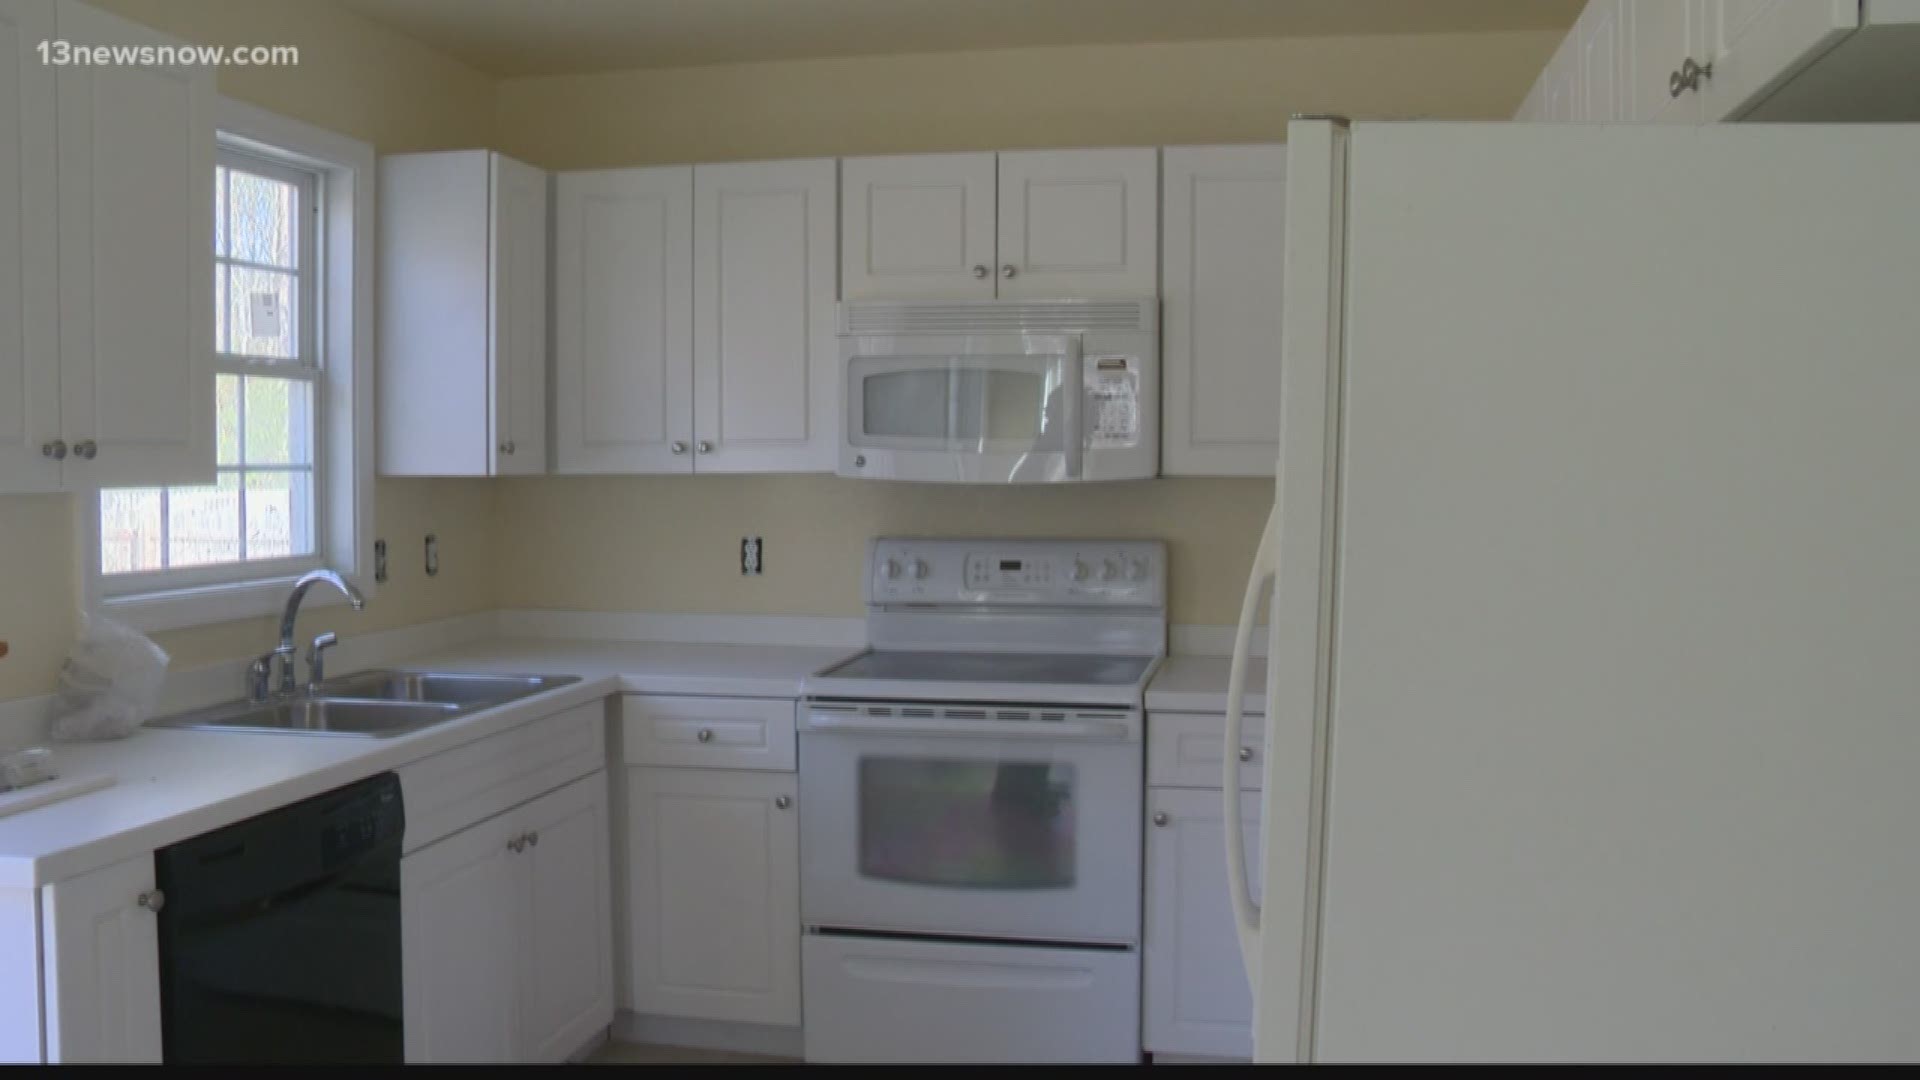 13News Now Jaclyn Lee spoke with the contractor who wanted to gift an elderly Suffolk couple with a new home, free of charge.